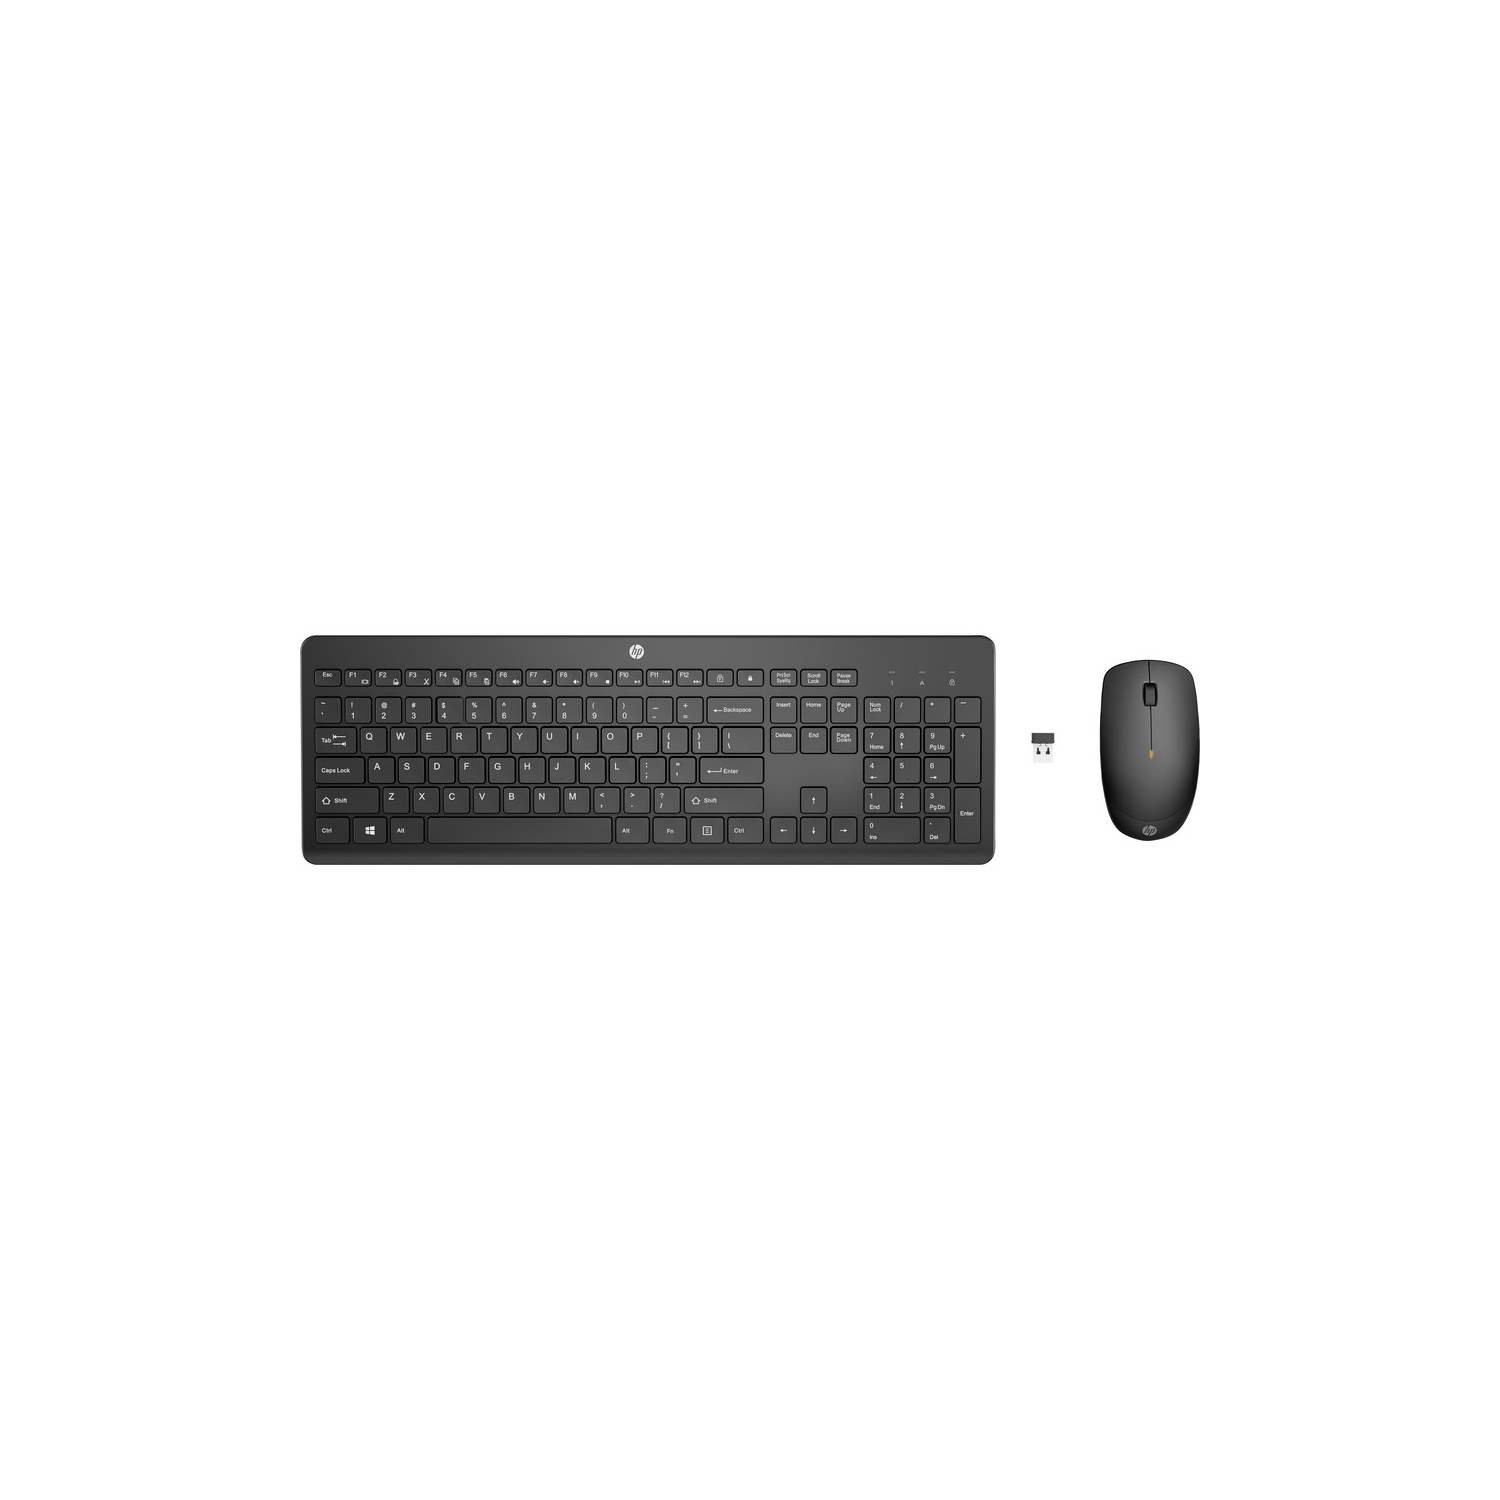 HP 235 Wireless Mouse and Keyboard Combo 1Y4D0UT#ABA